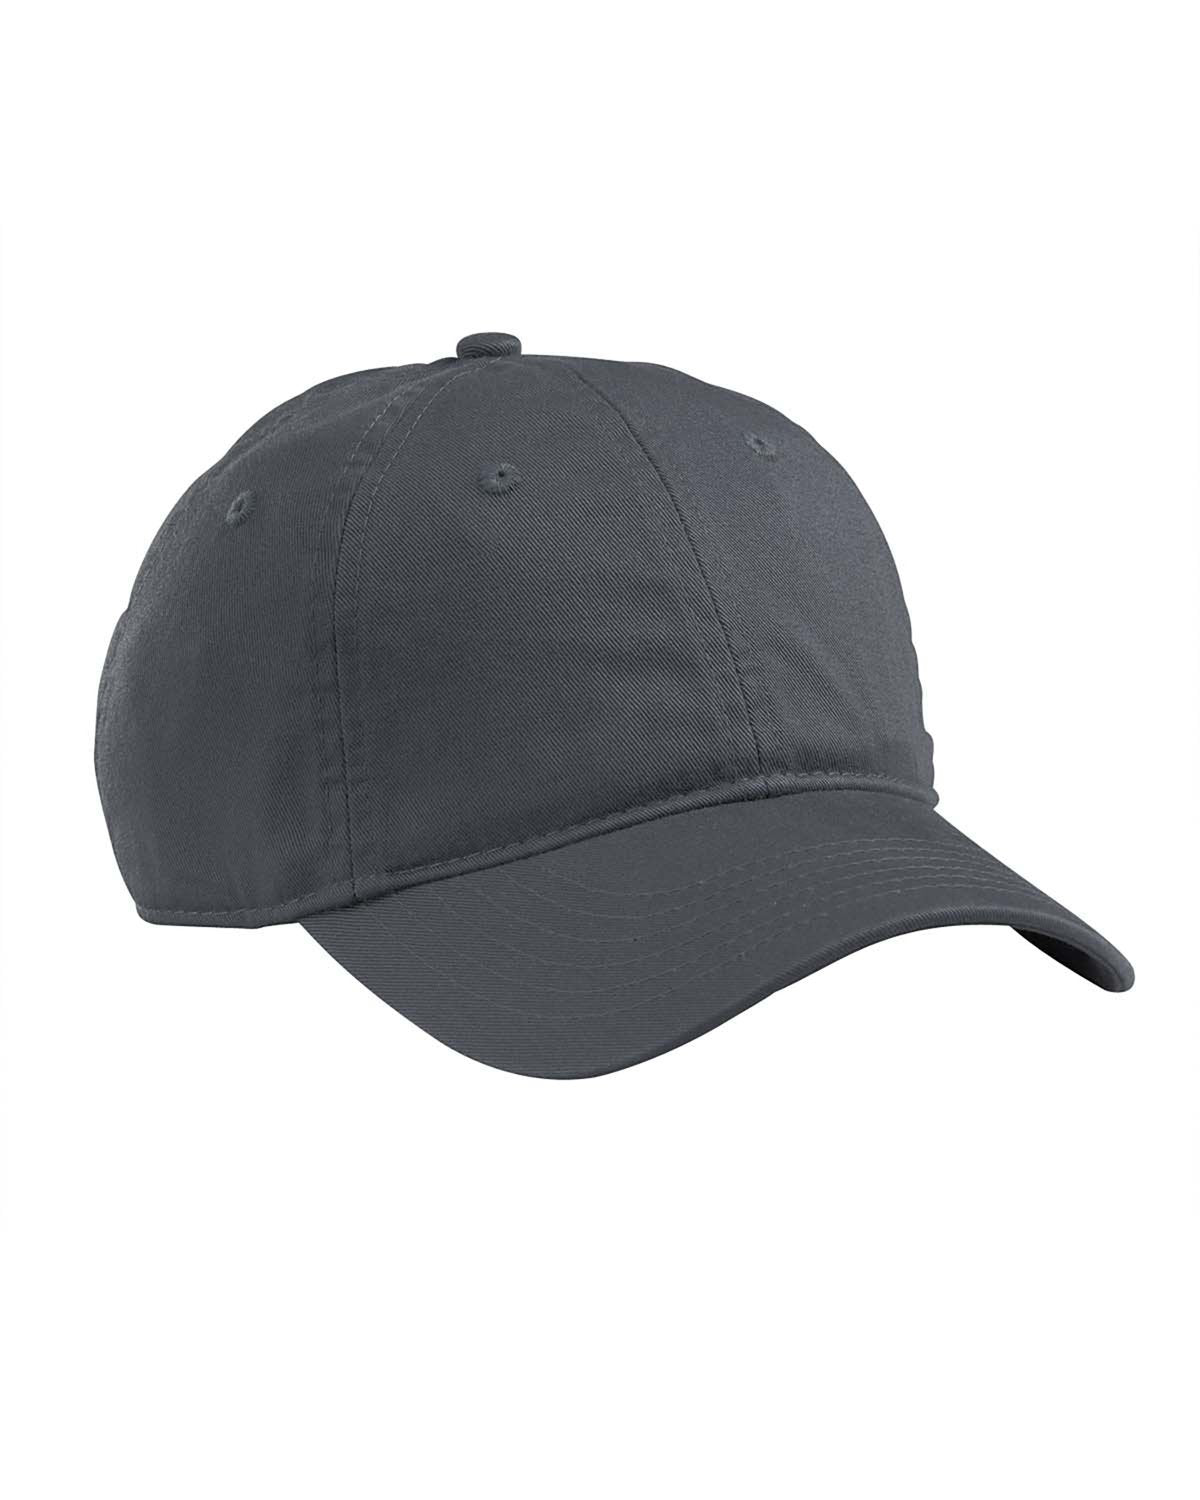 Customizable Econscious Organic Cotton Unstructured Baseball Hat in grey